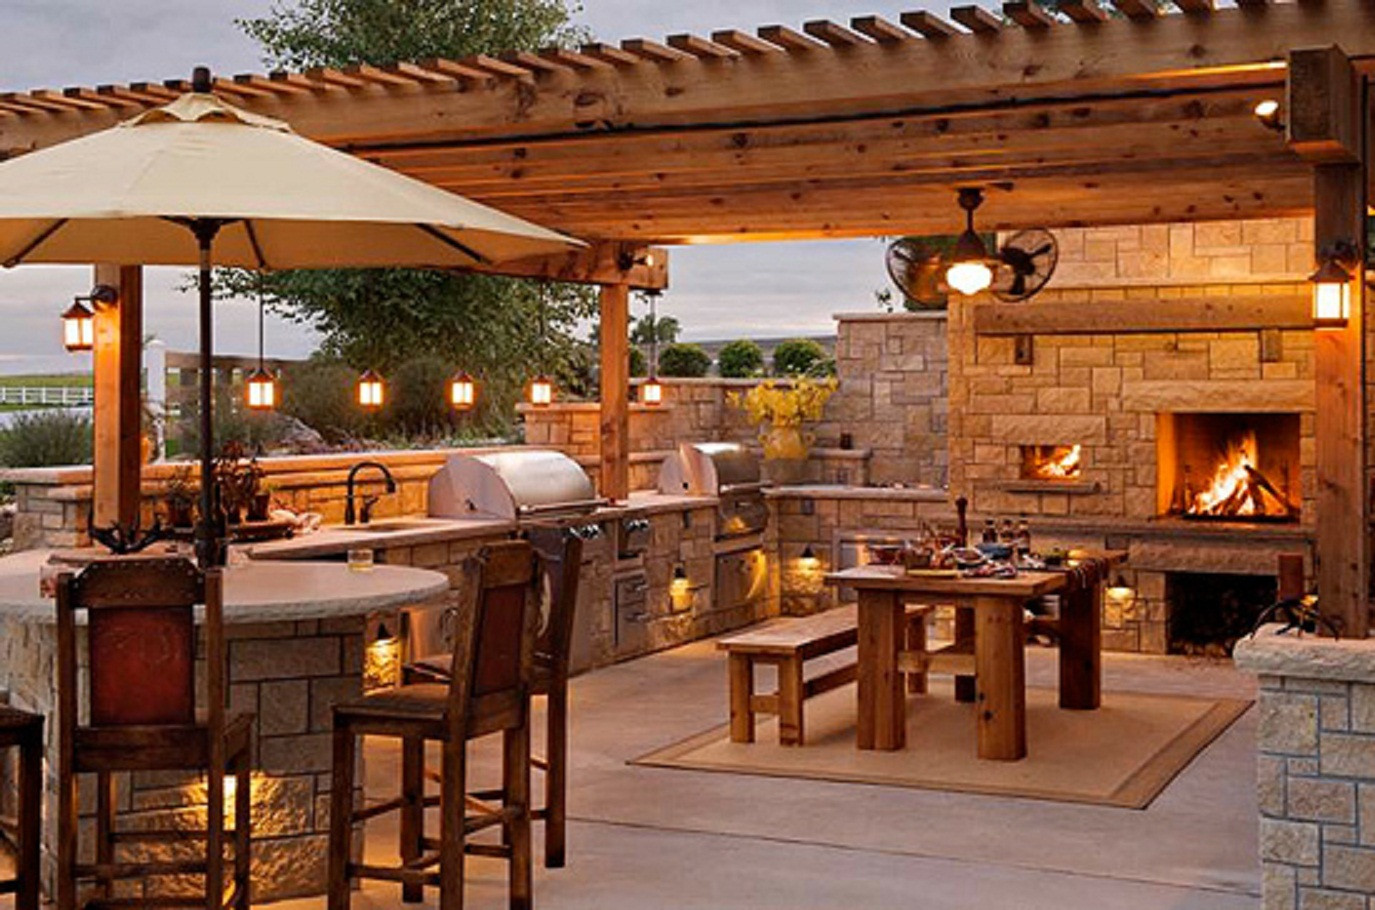 Design Outdoor Kitchen
 How to Design Your Perfect Outdoor kitchen Outdoor